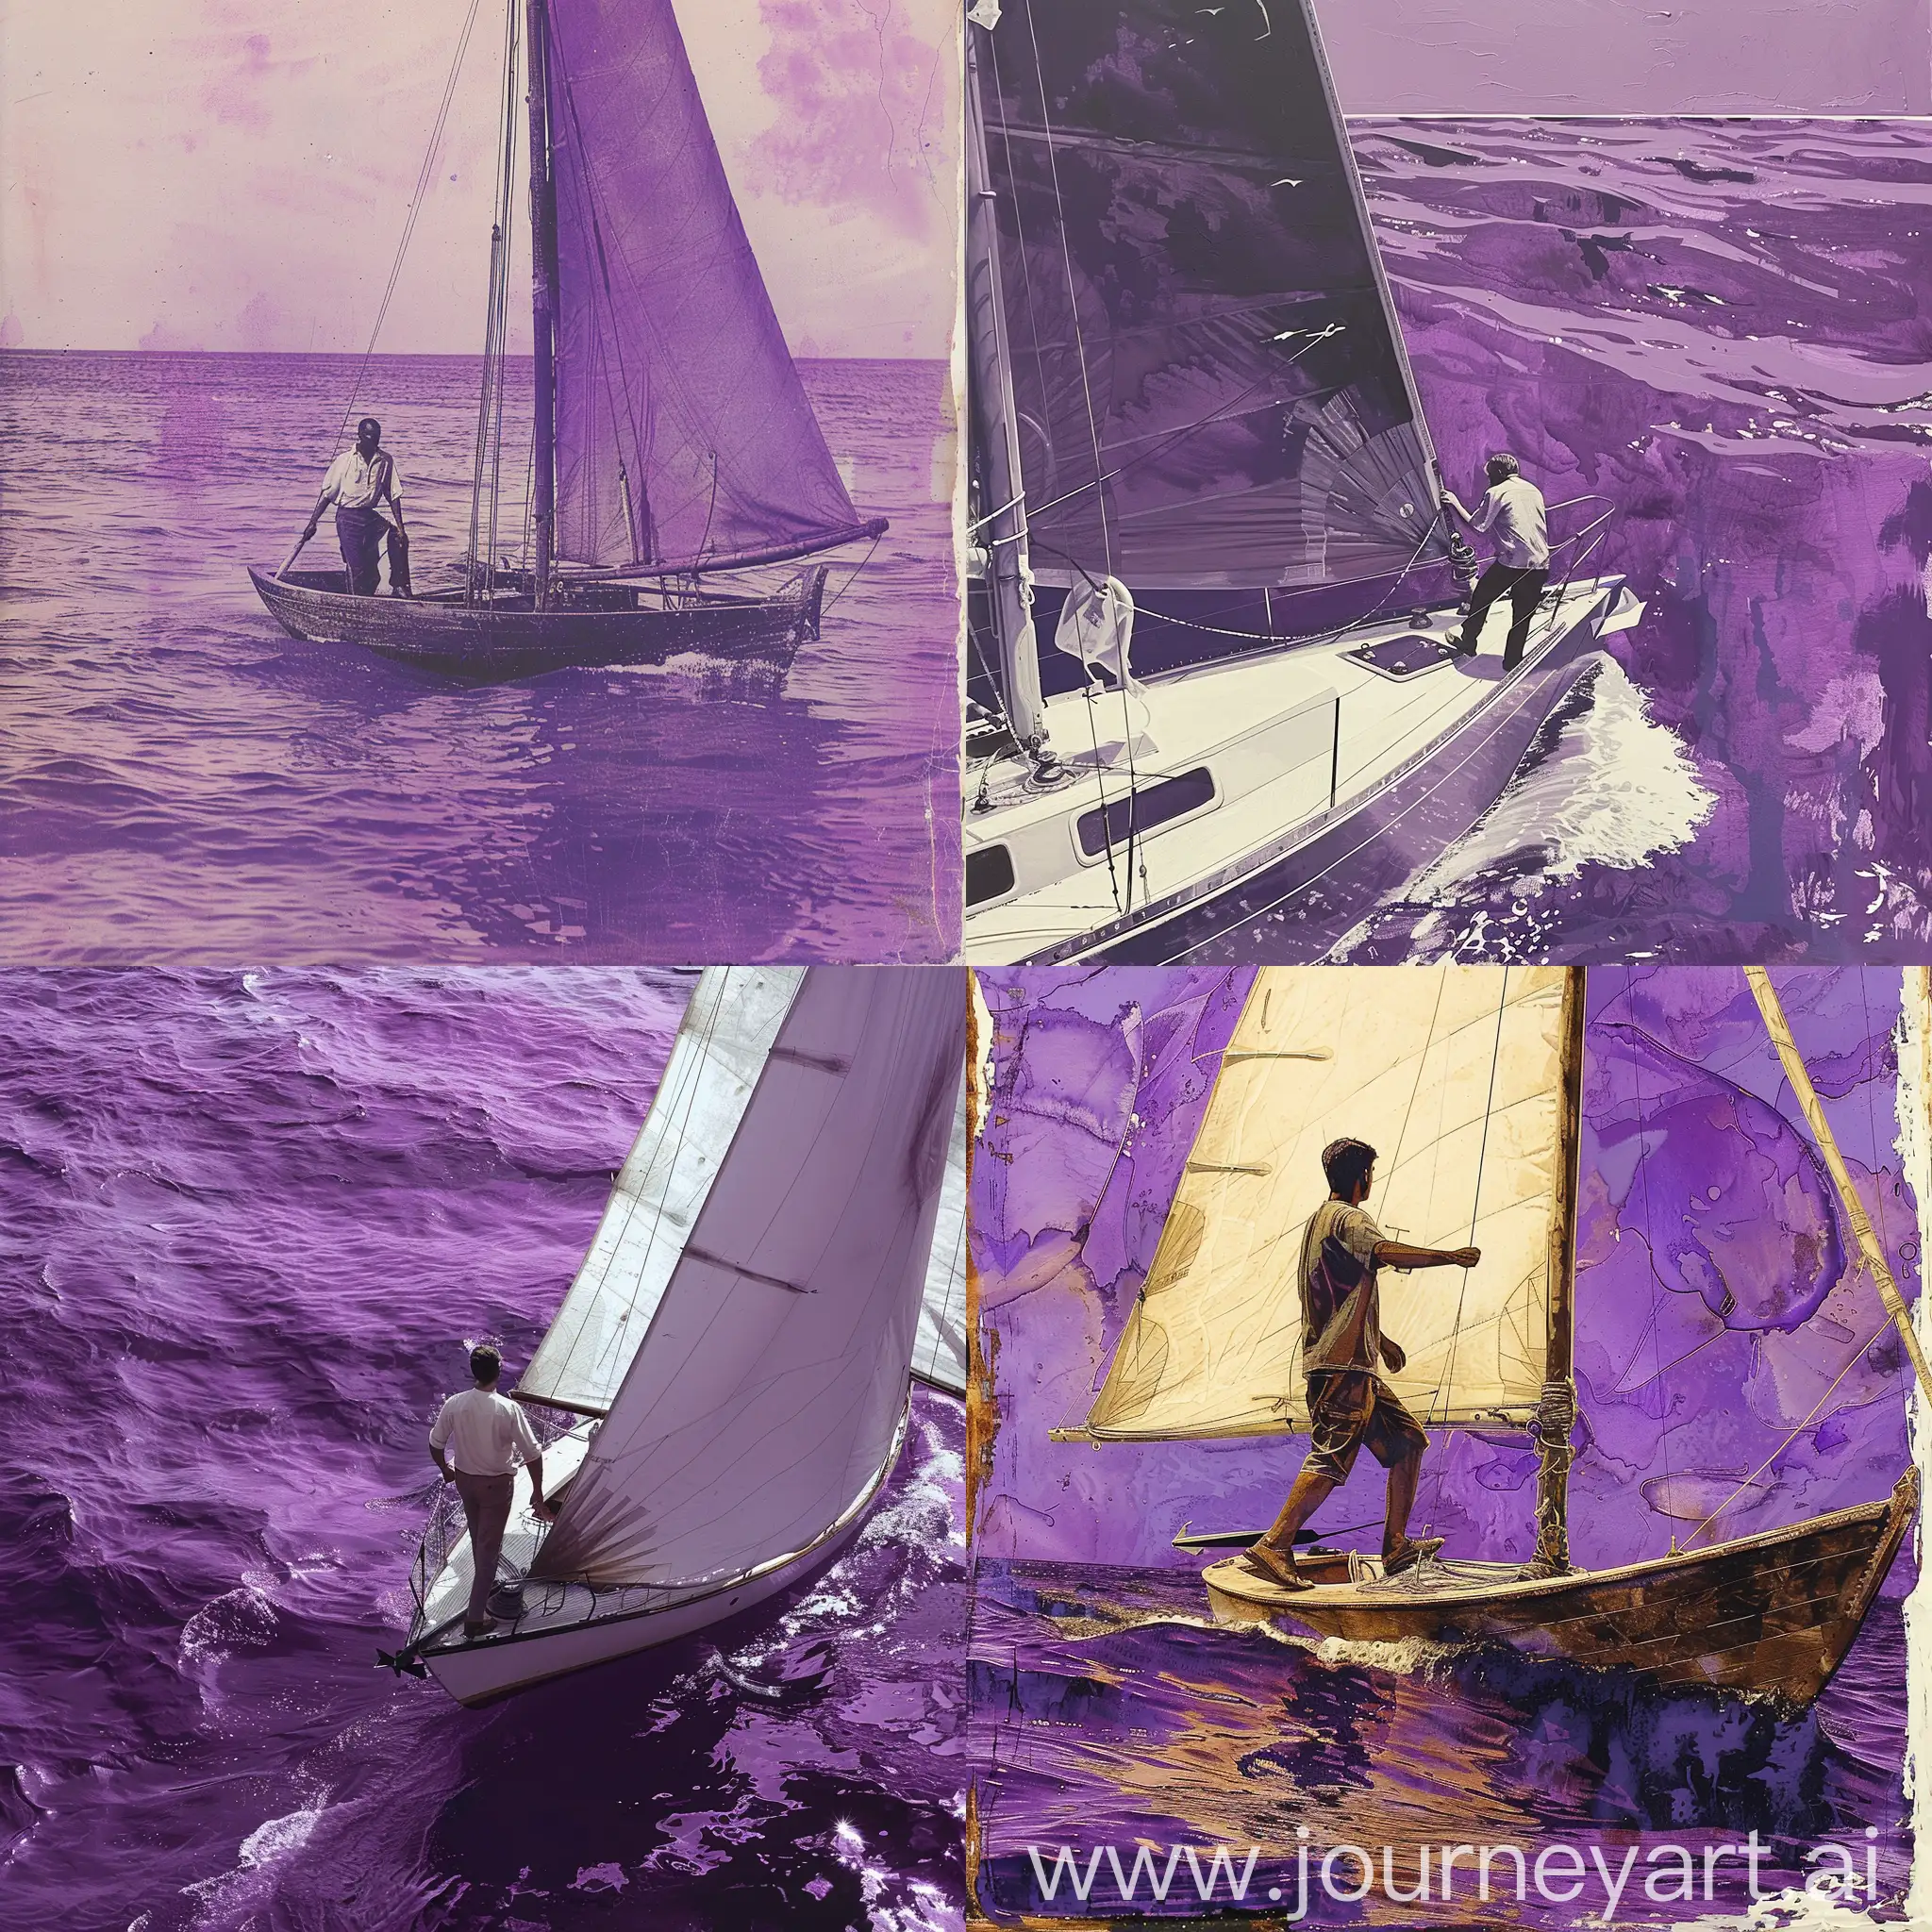 A man is stepping onto a sailboat, the sea is purple